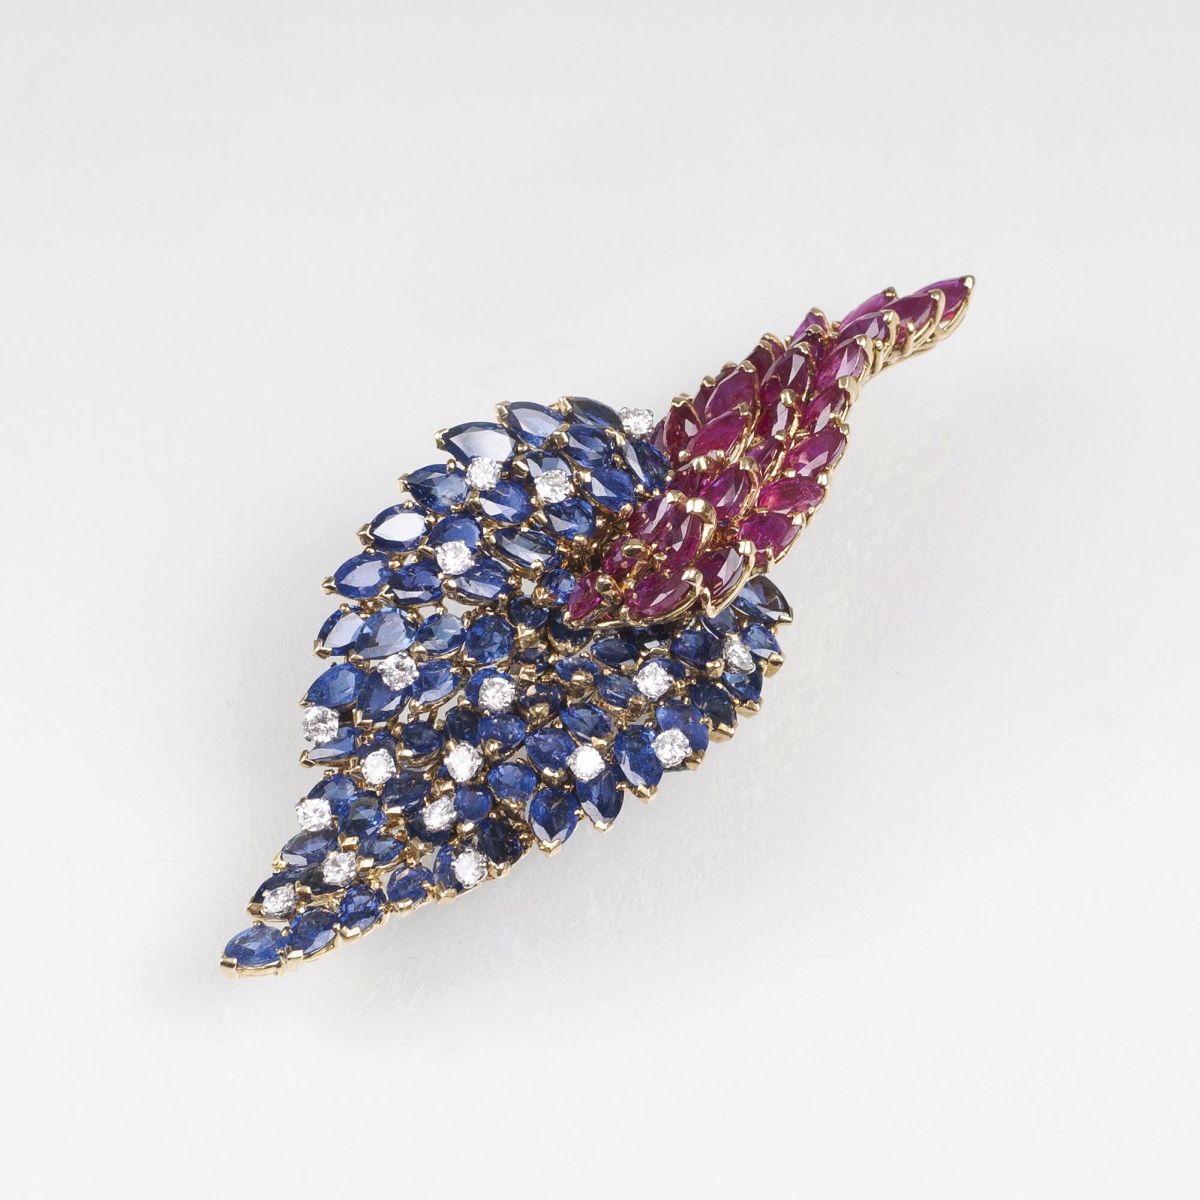 An extraordinary French Vintage Brooch with Rubies, Diamonds and Natural Sapphires - image 2